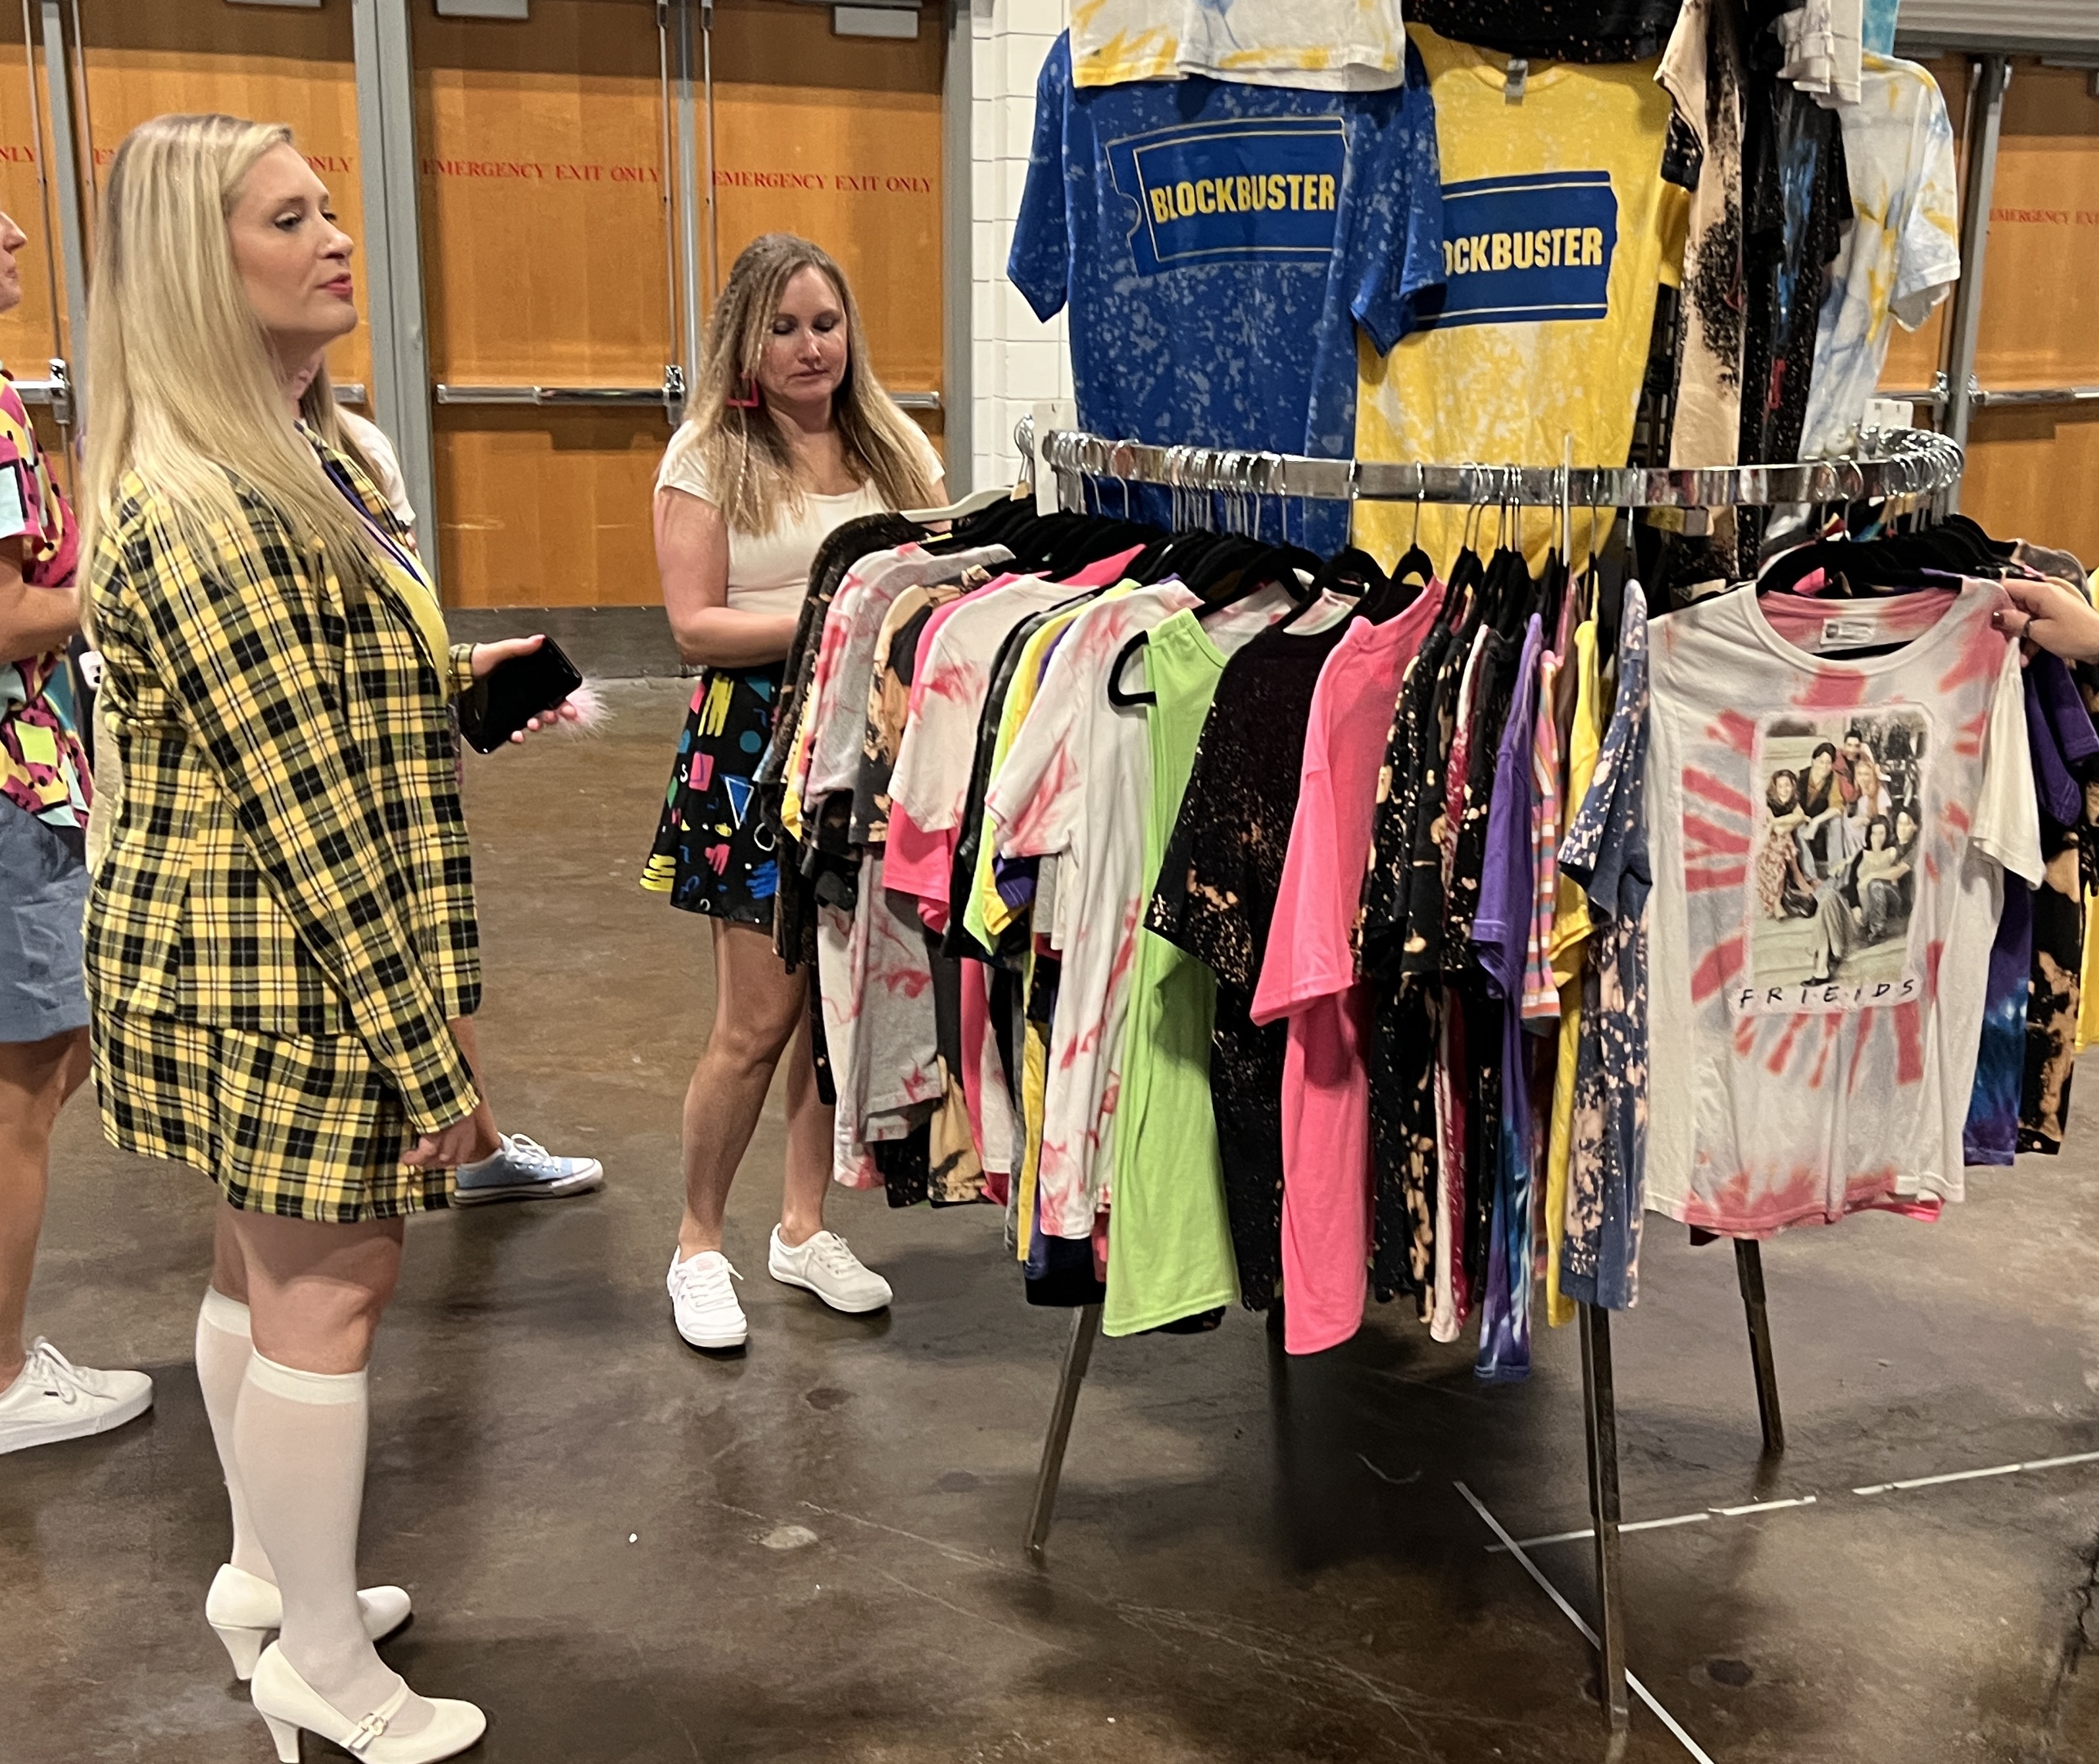 Jenny Albano, 37, of Tampa, left, peruses a rack of 1990s-themed T-shirts during the 90s Con event at Tampa Convention Center on Sunday, Sept. 17, 2023. Albano came to the convention dressed as Cher from "Clueless."